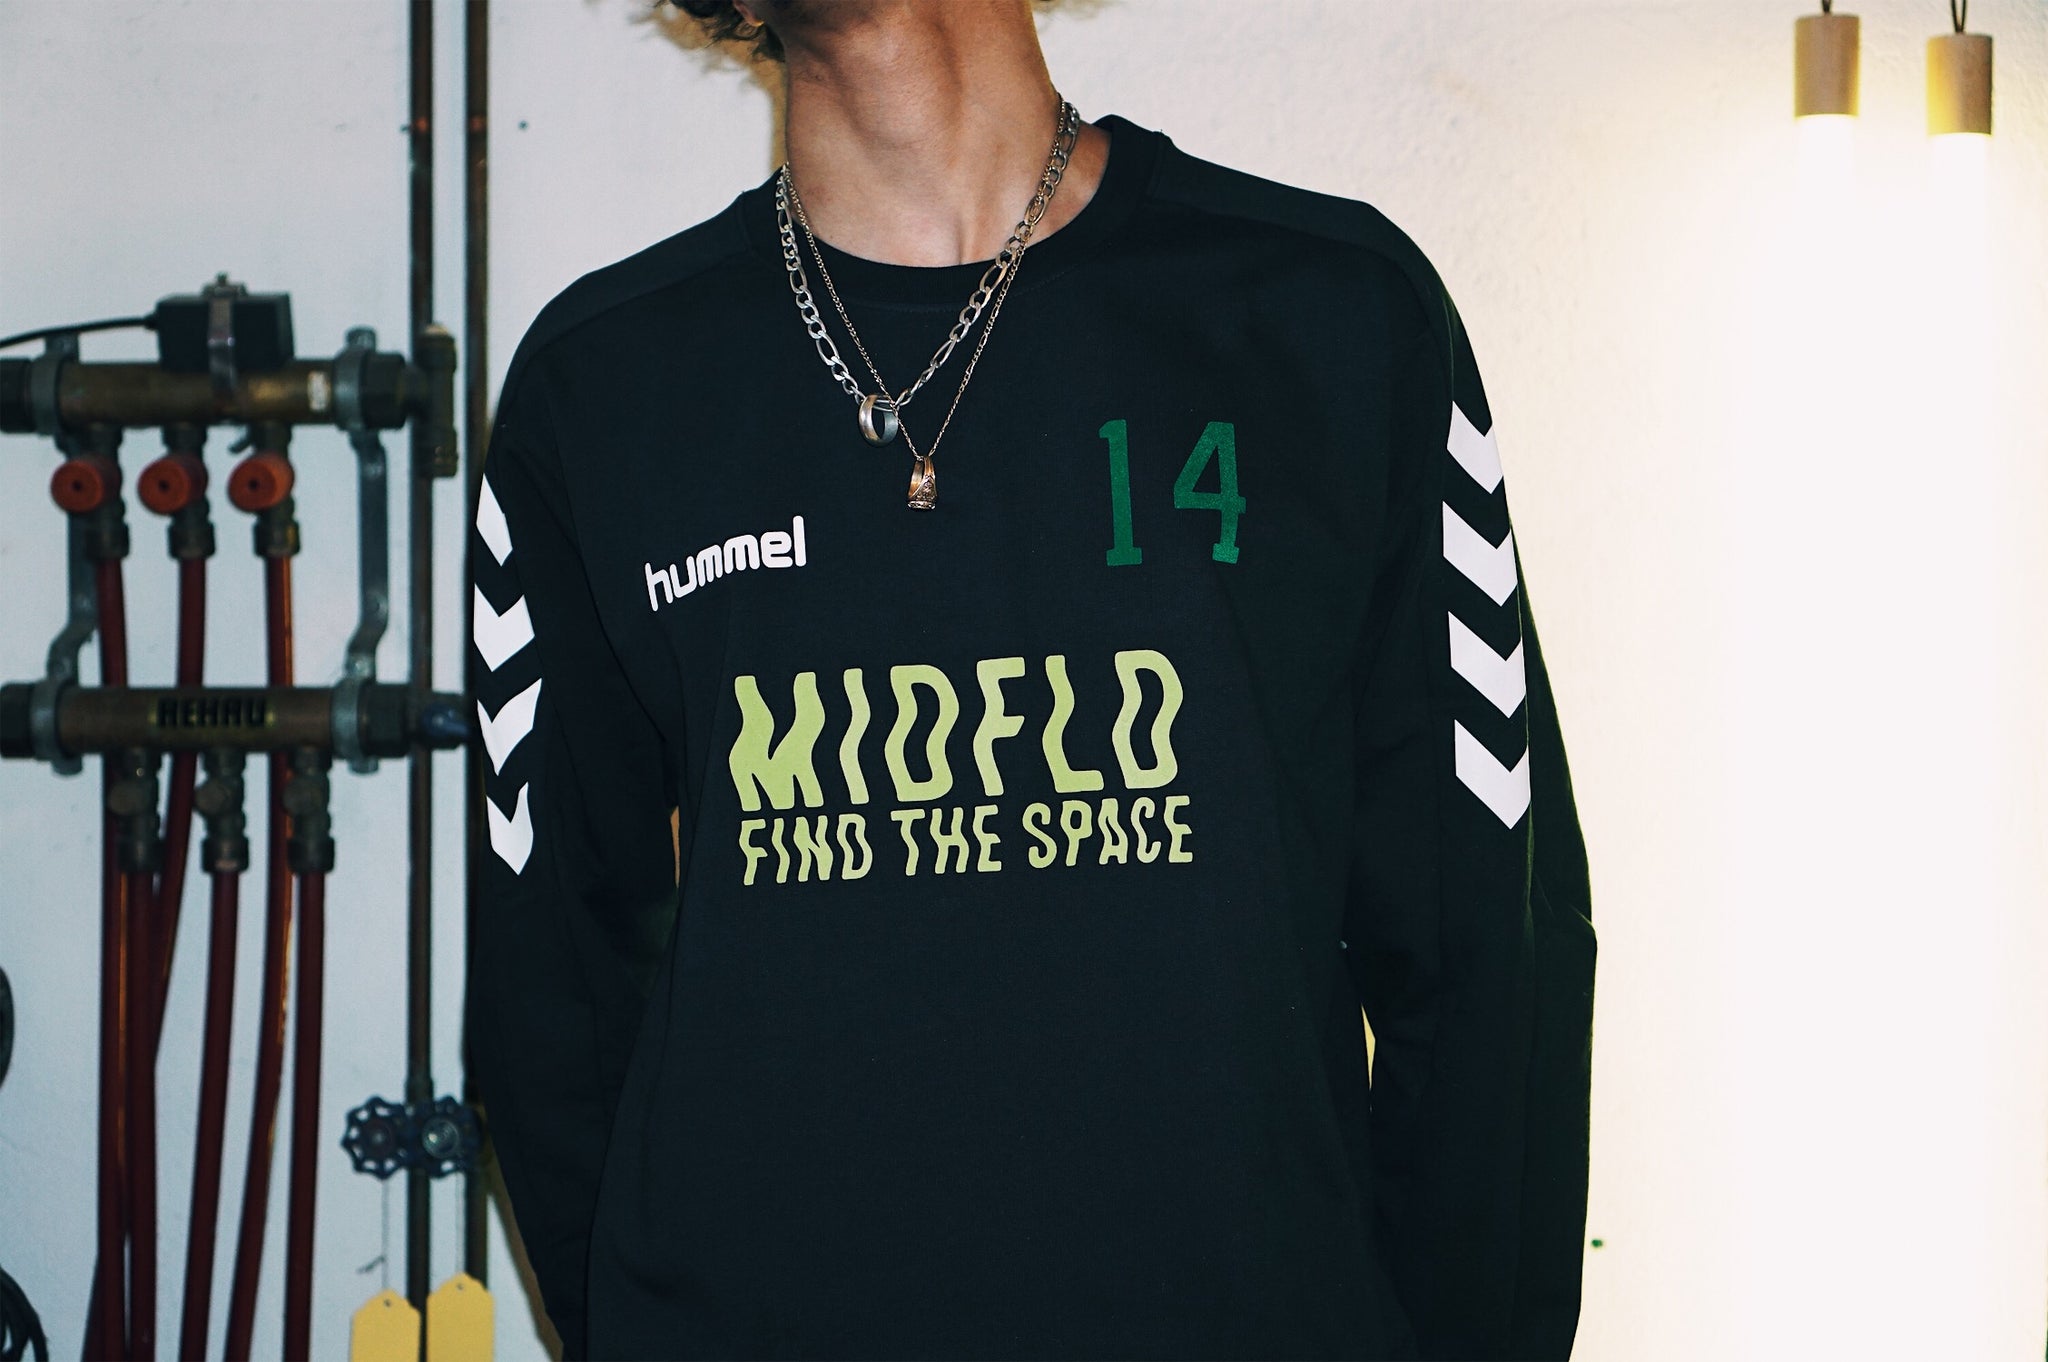 MIDFLD - Find the space.